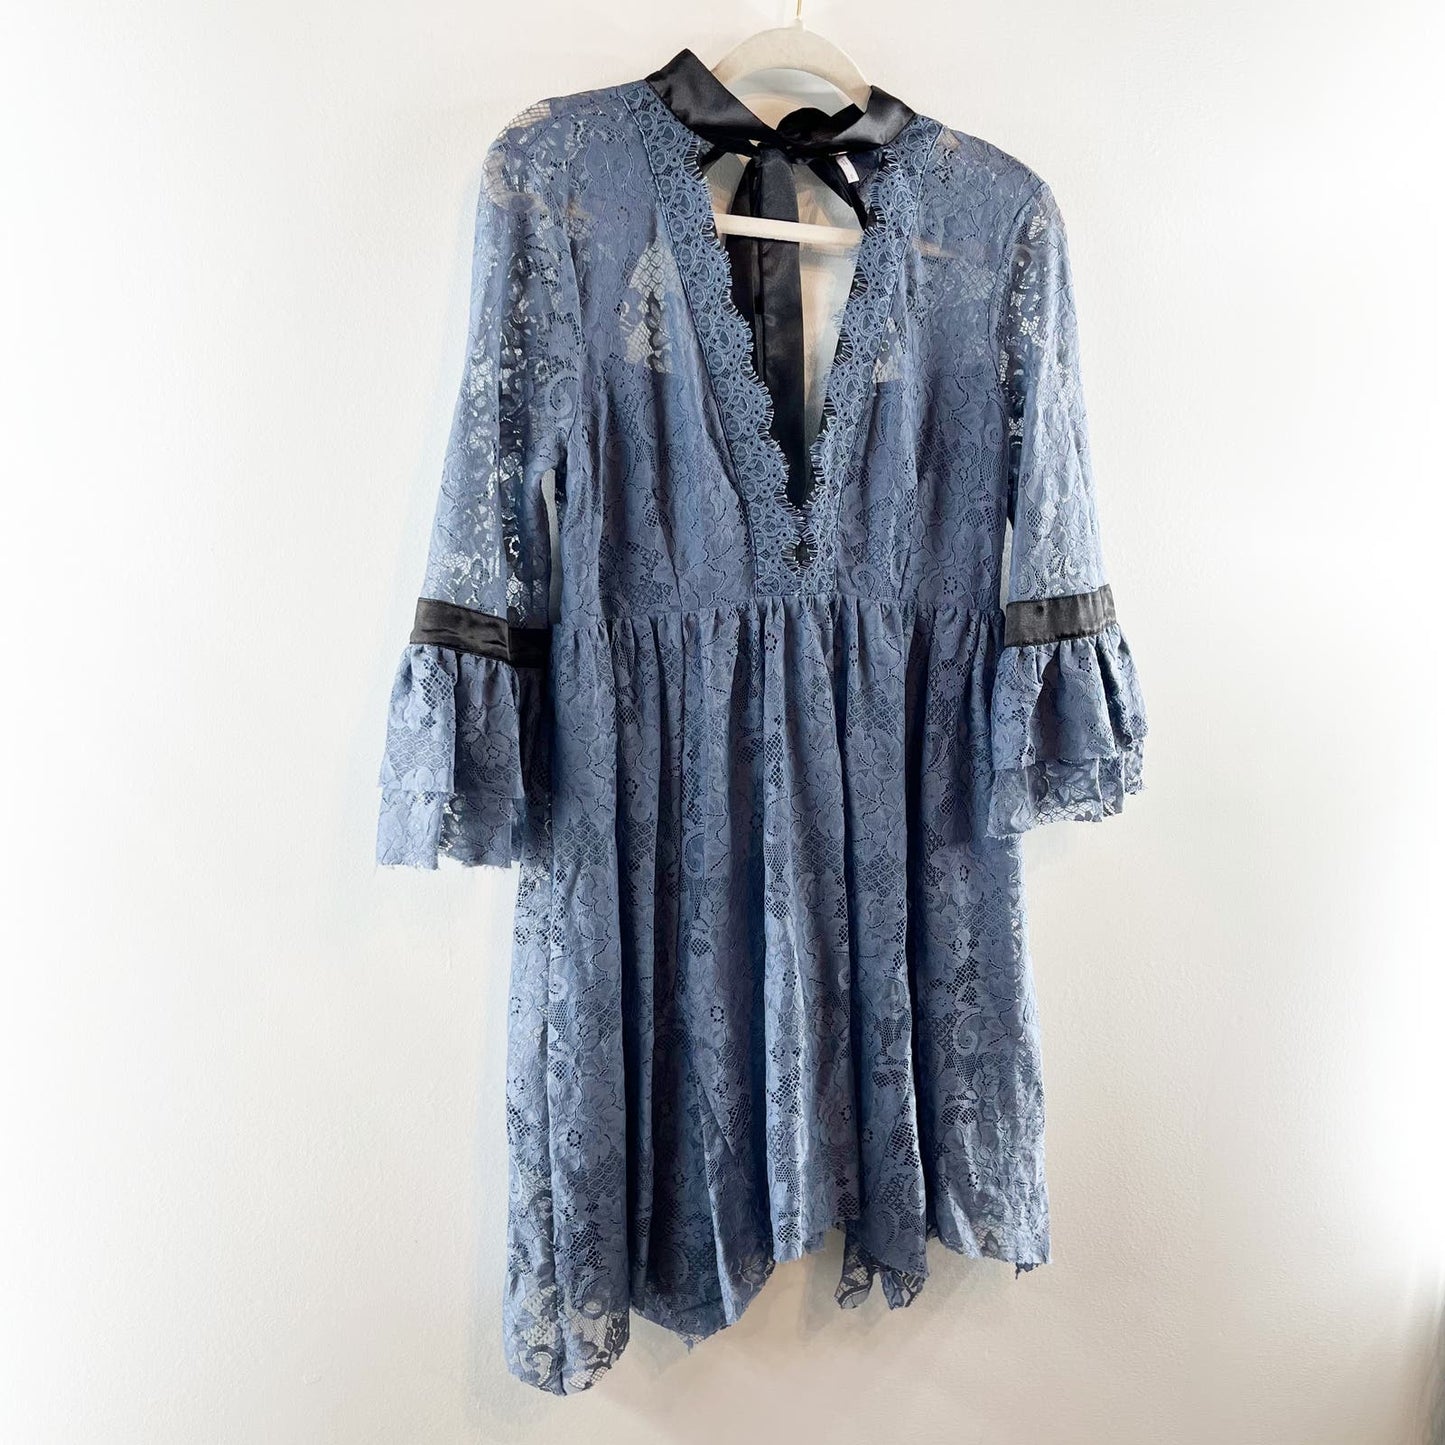 Free People Gilded Lace Victorian Mini Dress Dusty Blue Small